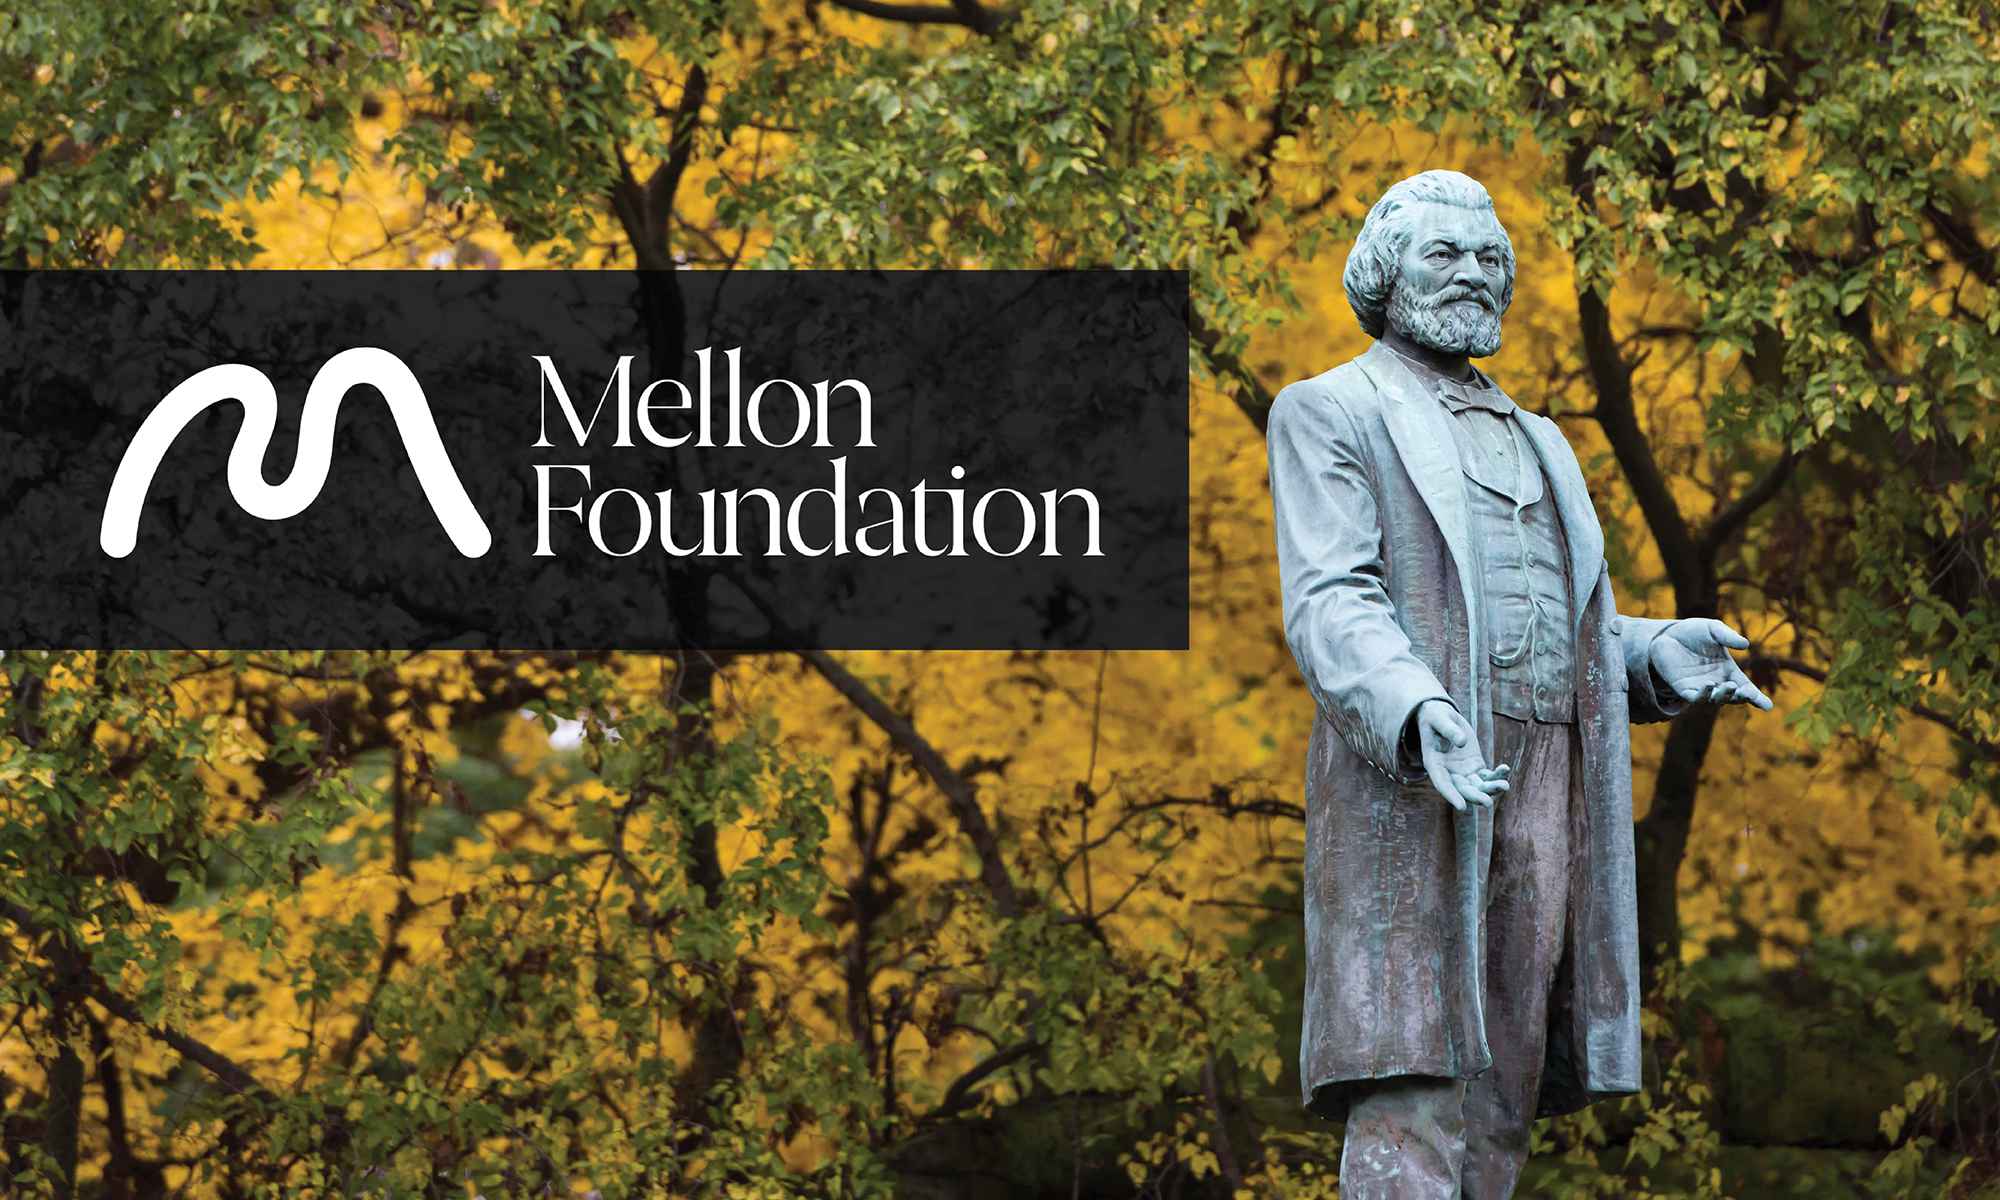 Frederick Douglass statue against the wooded backdrop of Highland Park with an inset of the Mellon Foundation logo displayed in white against black background.